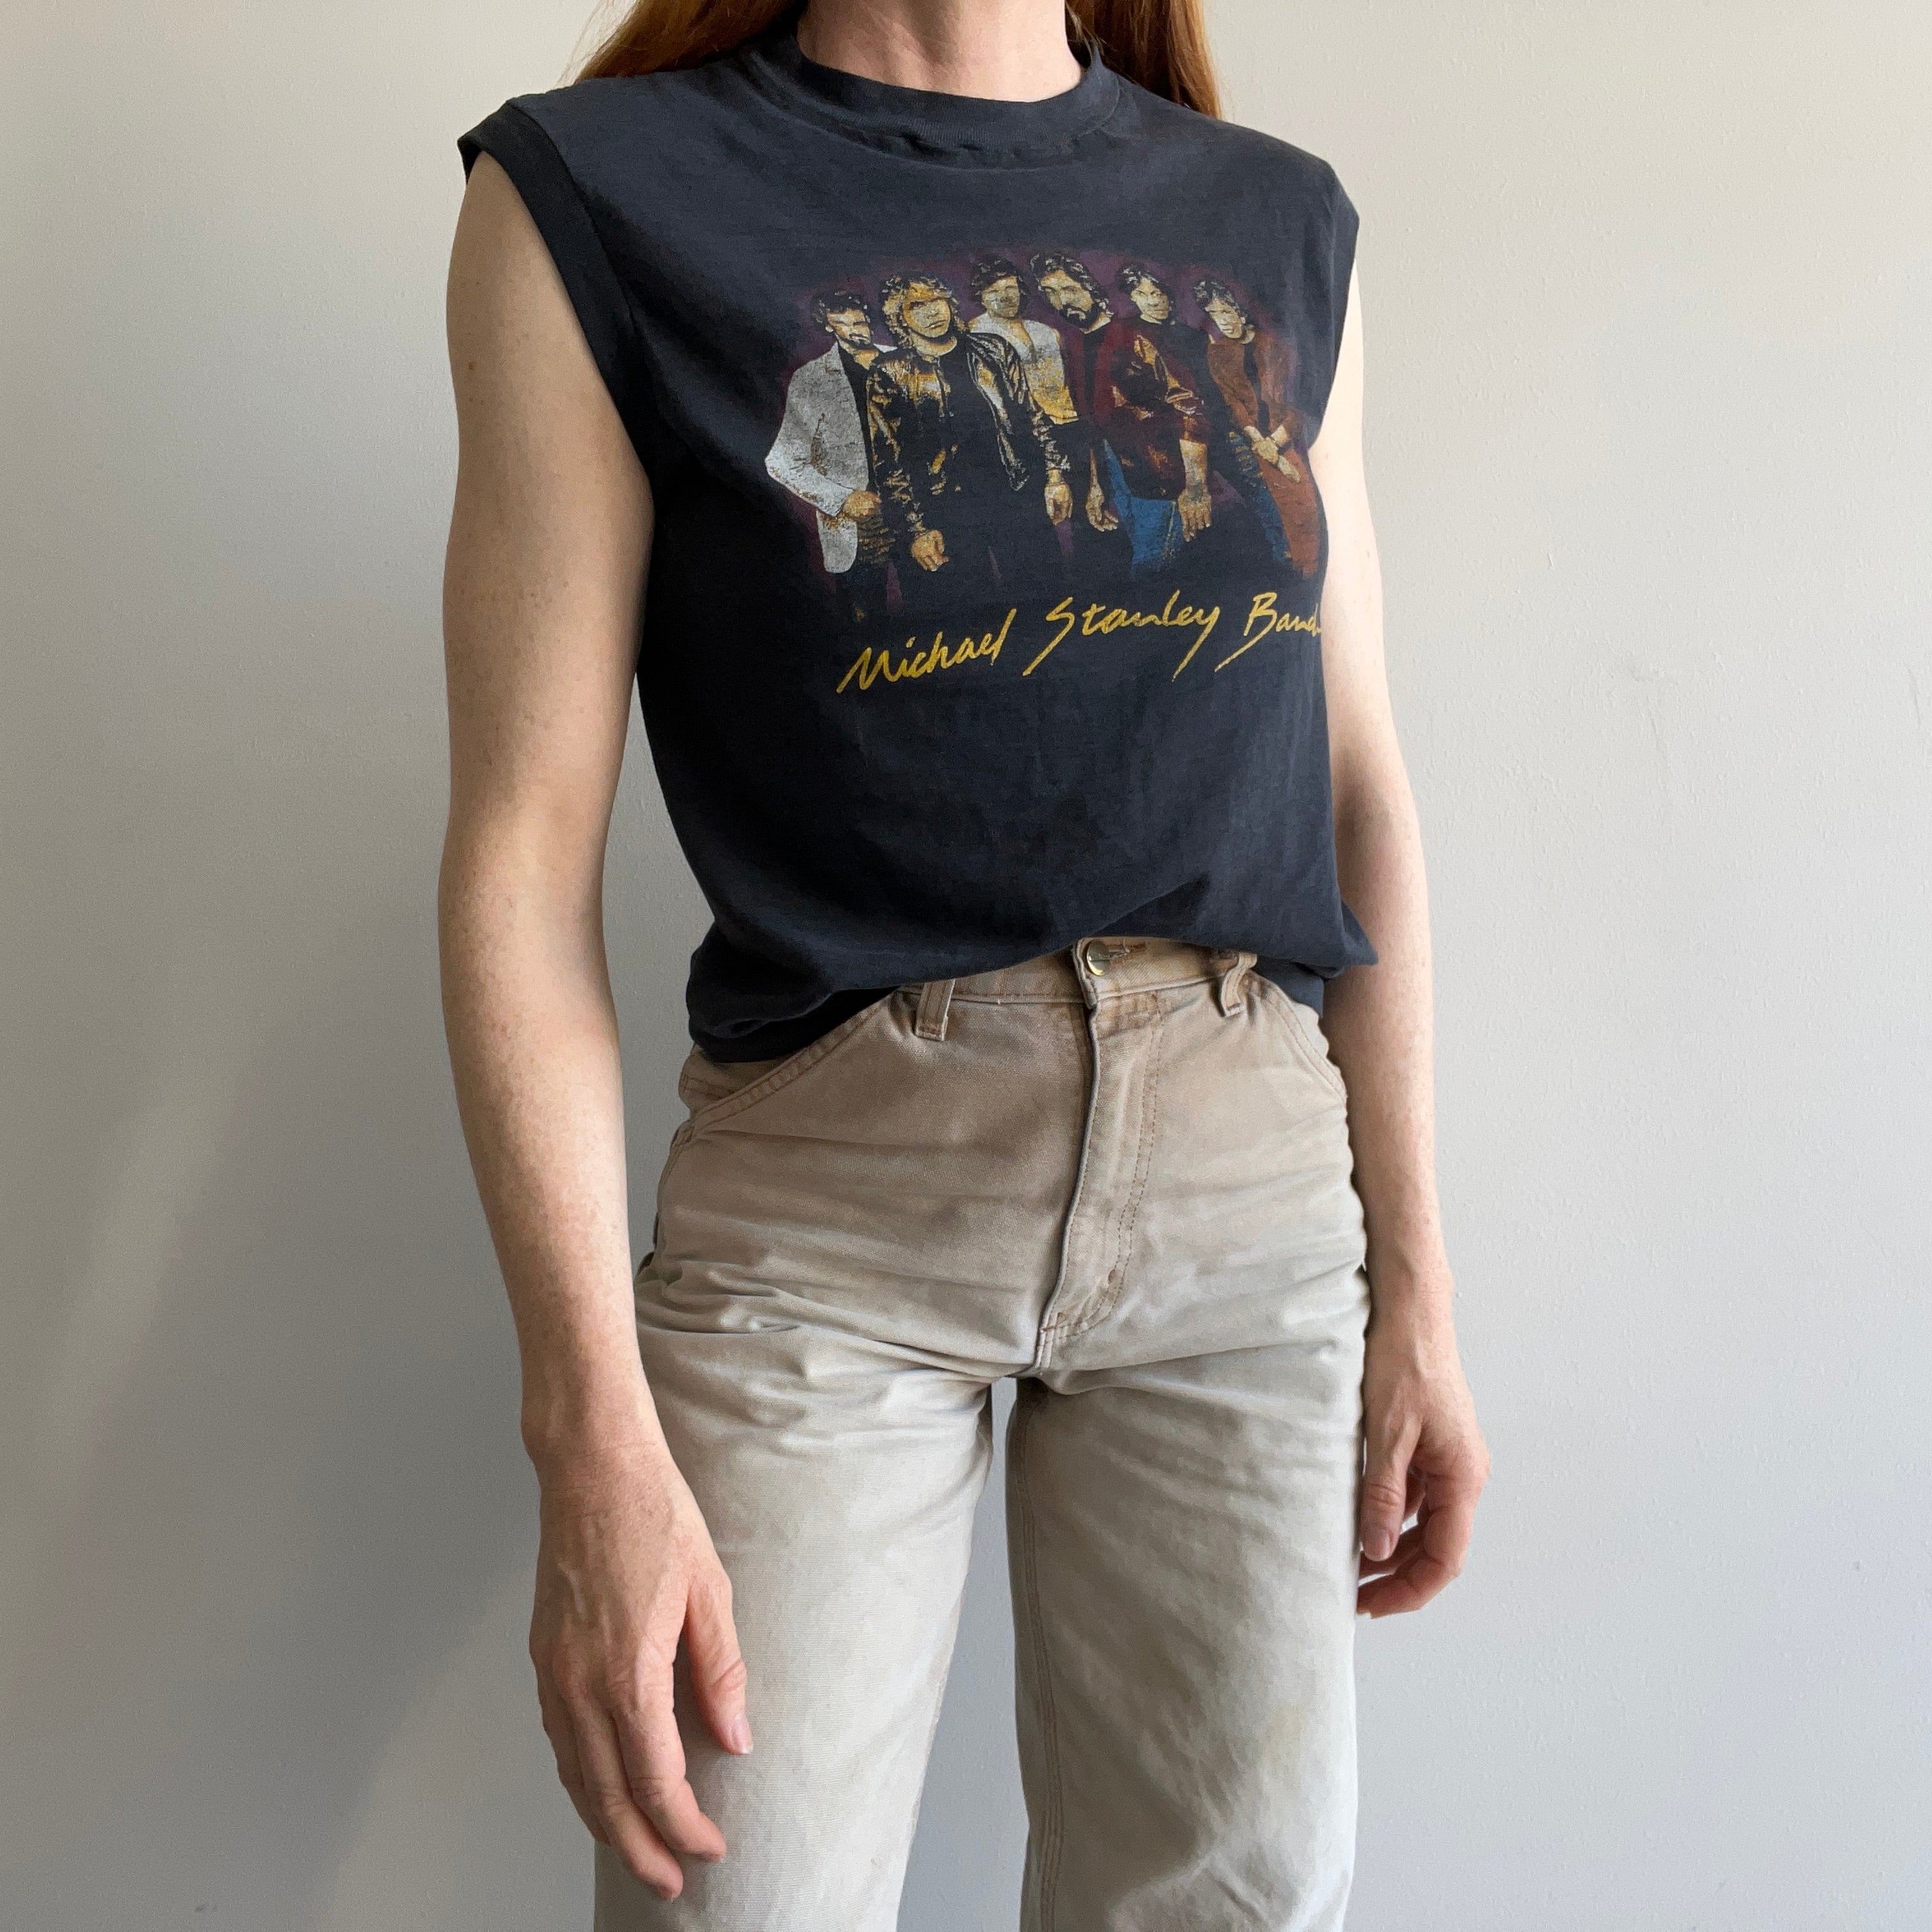 1984 Michael Stanley Band Muscle Tank